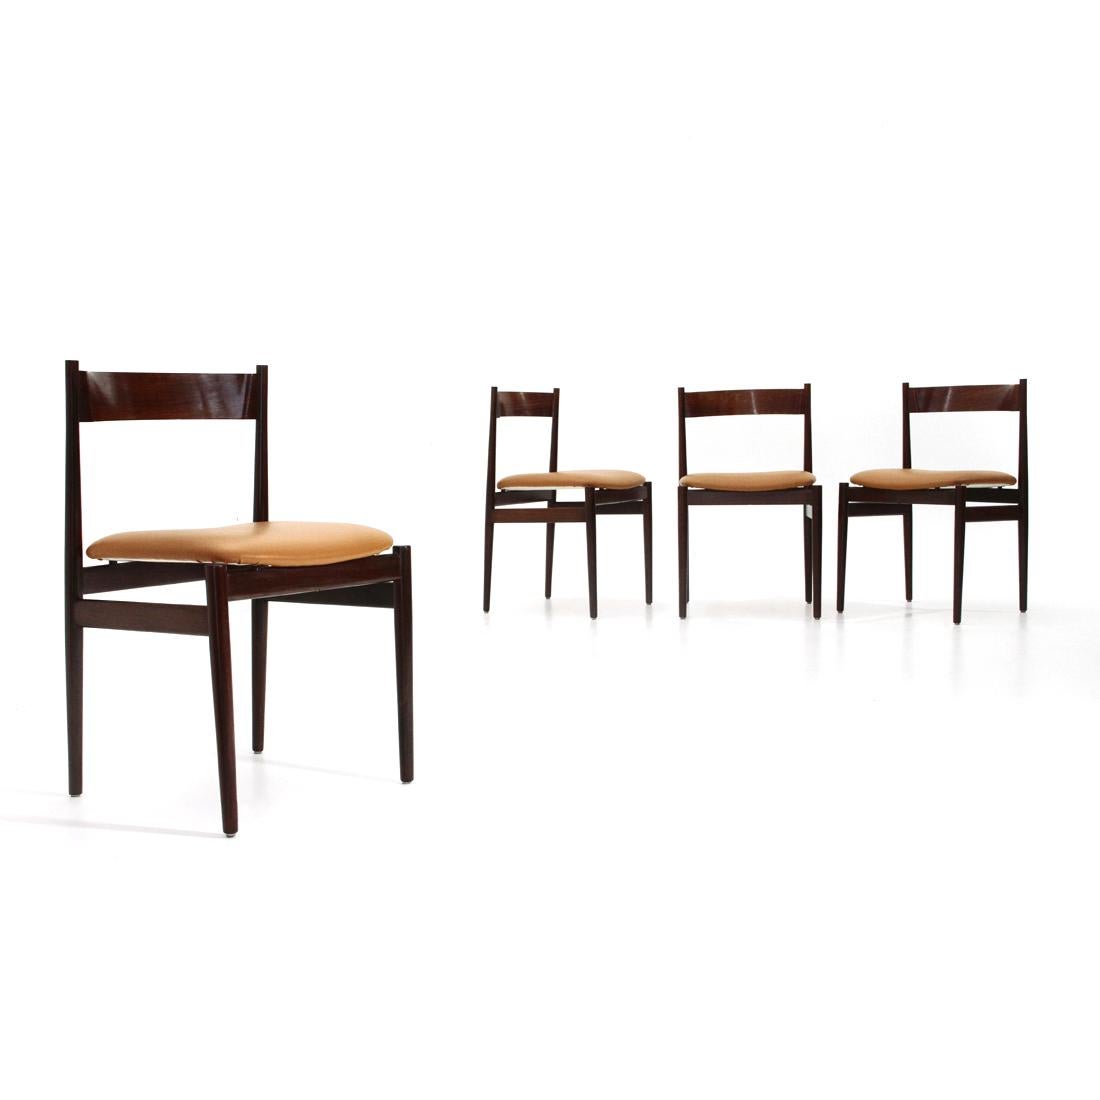 4 chairs produced in the 1950s by Cassina and designed by Gianfranco Frattini.
Solid wood structure.
Cylindrical legs slightly tapered.
Crossbars with rounded edges.
Back in curved plywood.
Padded seat lined in brown hazelnut eco leather.
Good